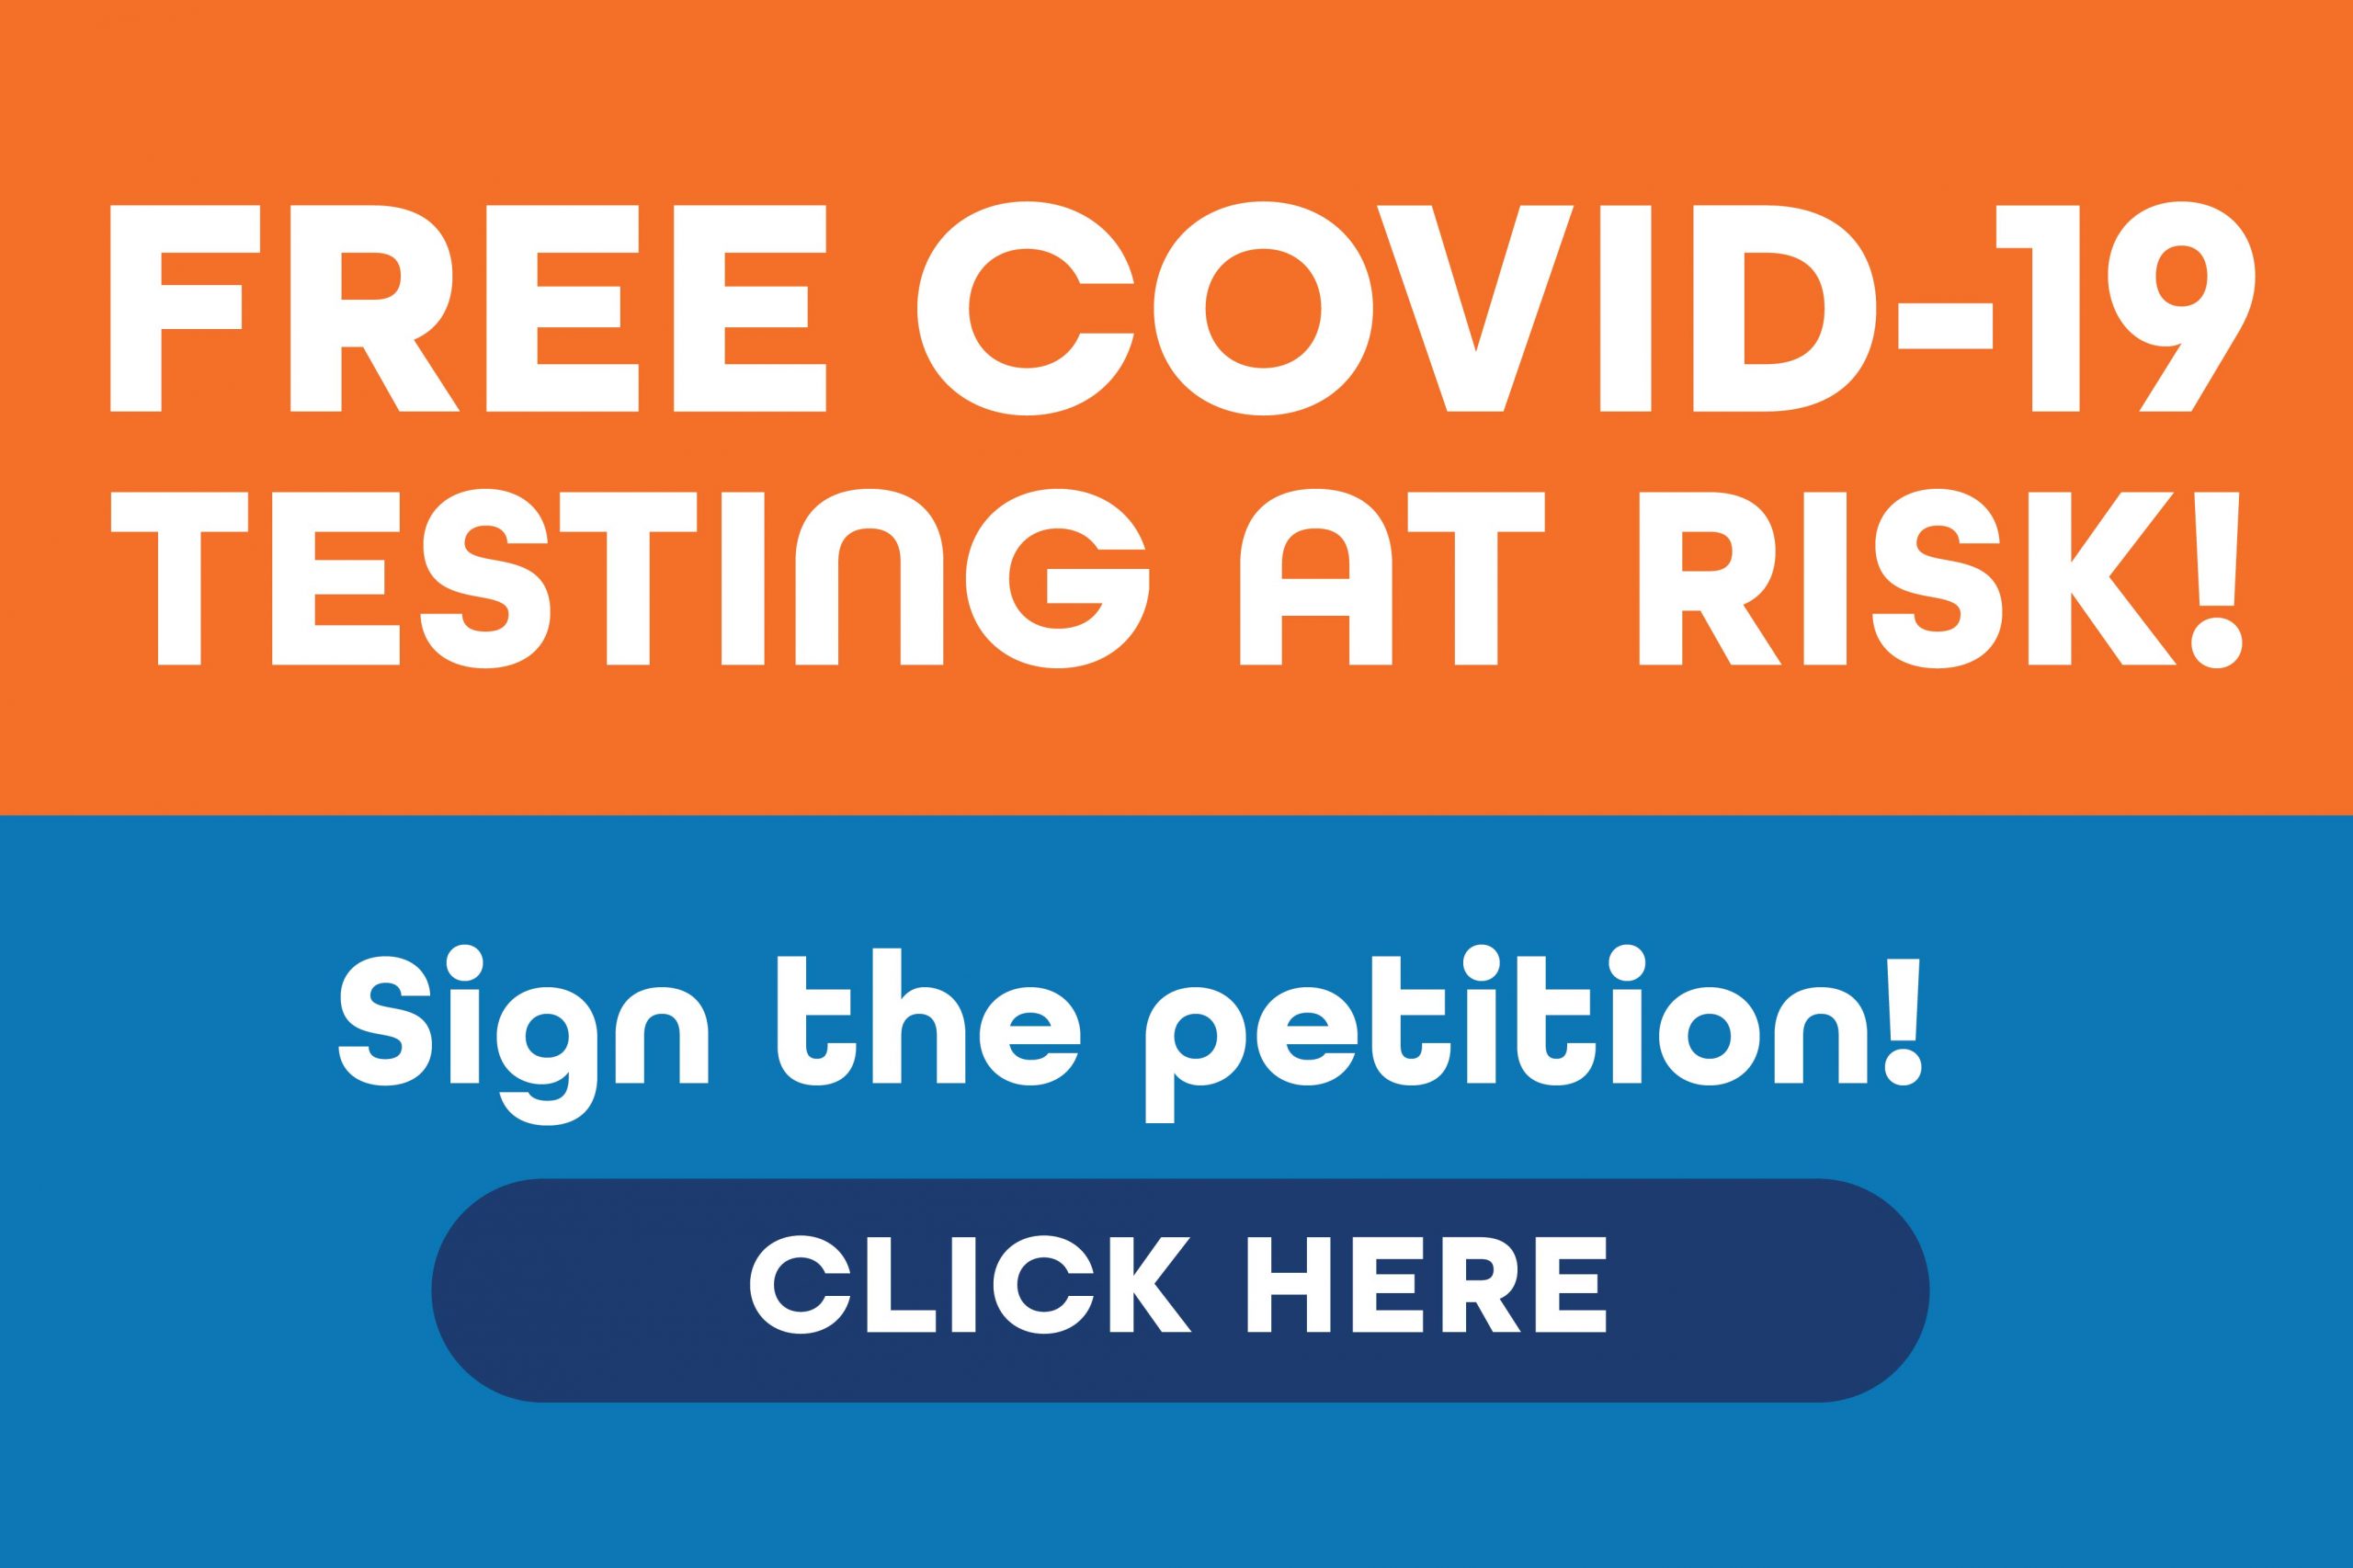 The Federal decision to not fund COVID-19 testing thru the HRSA will adversely impact the access for uninsured to receive reliable testing. We encourage you to sign this petition to ensure that those who are not covered by insurance can continue to rely on the HRSA fund to cover claims submited for uninsured patients who still need to be able to have access to free COVID-19 testing.